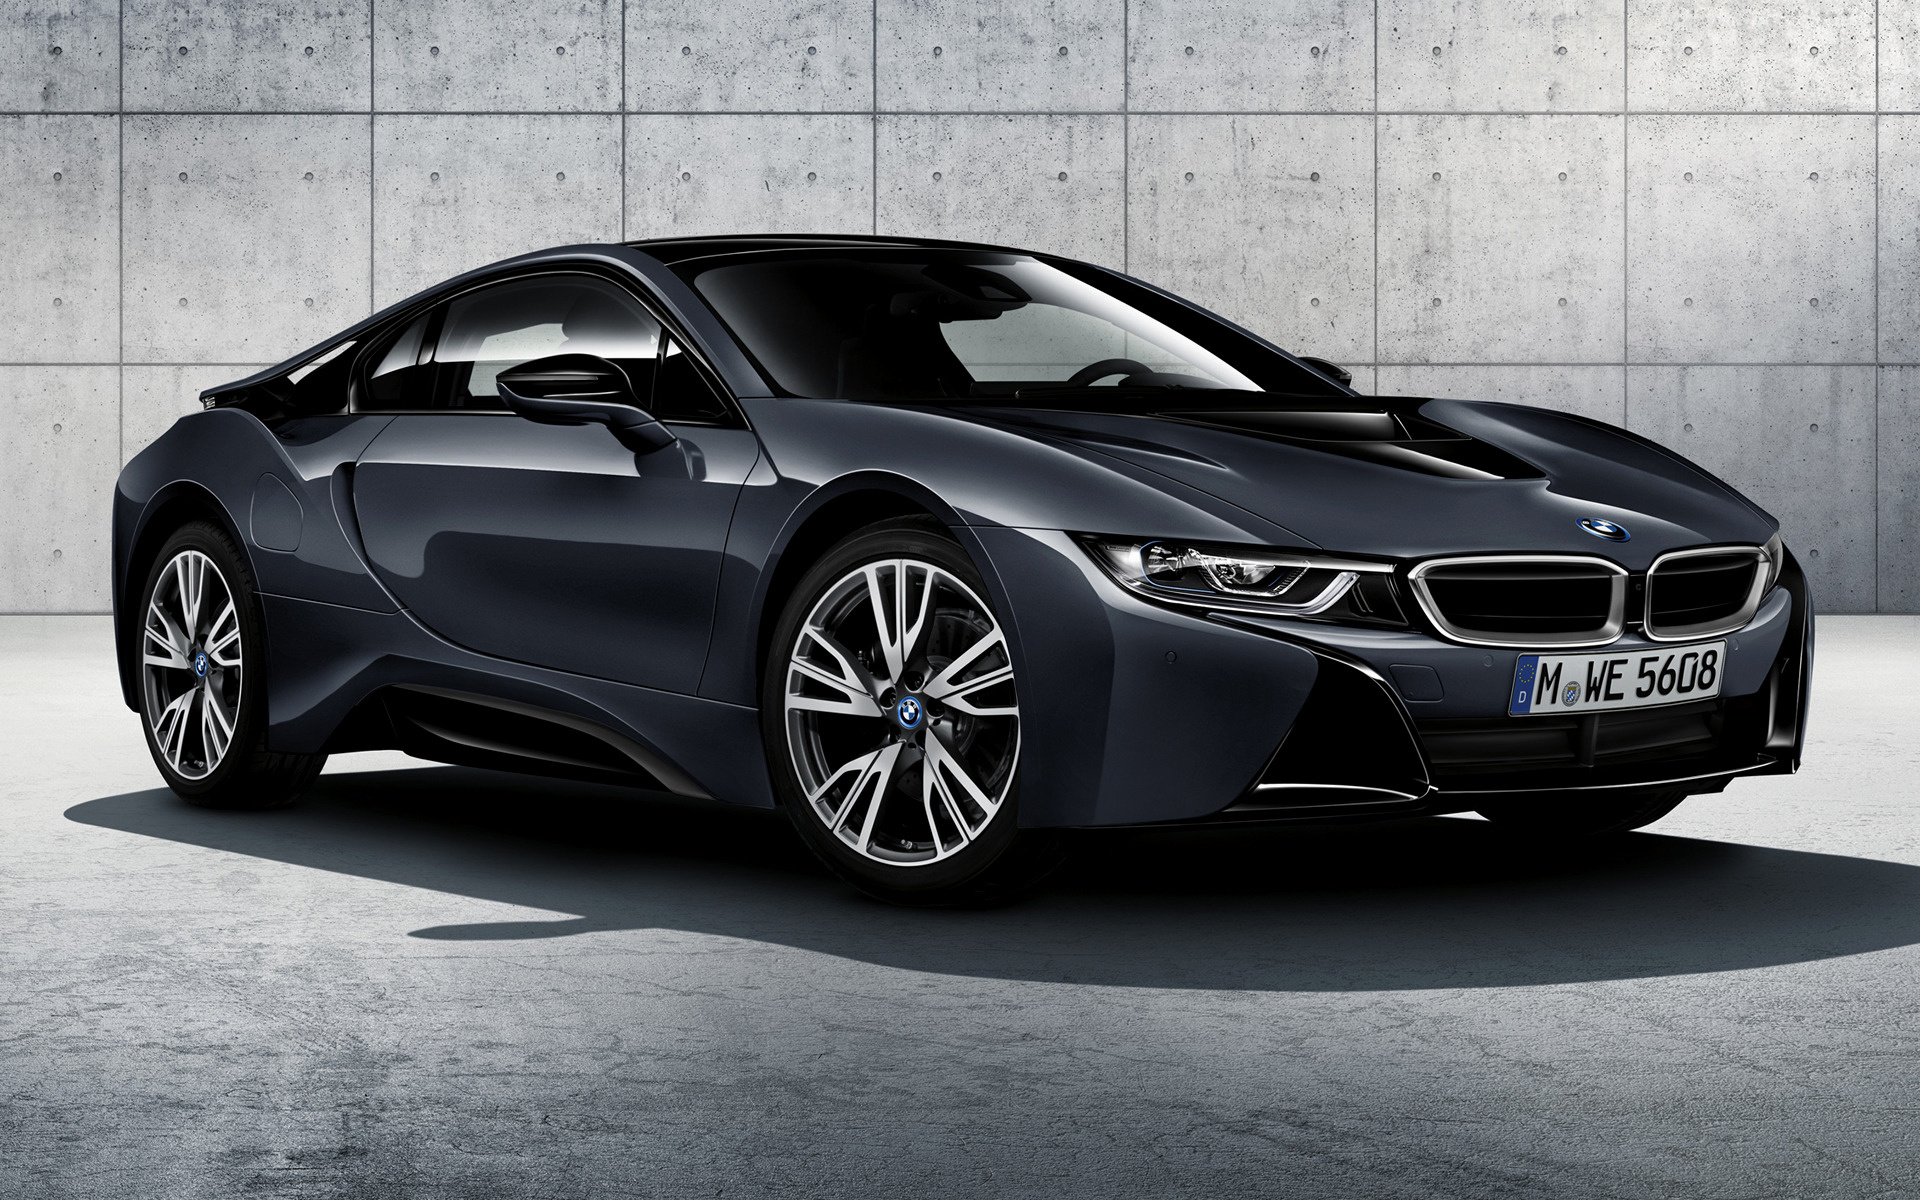 2016 Bmw I8 Protonic Dark Silver Edition Wallpapers And Hd Images Car Pixel